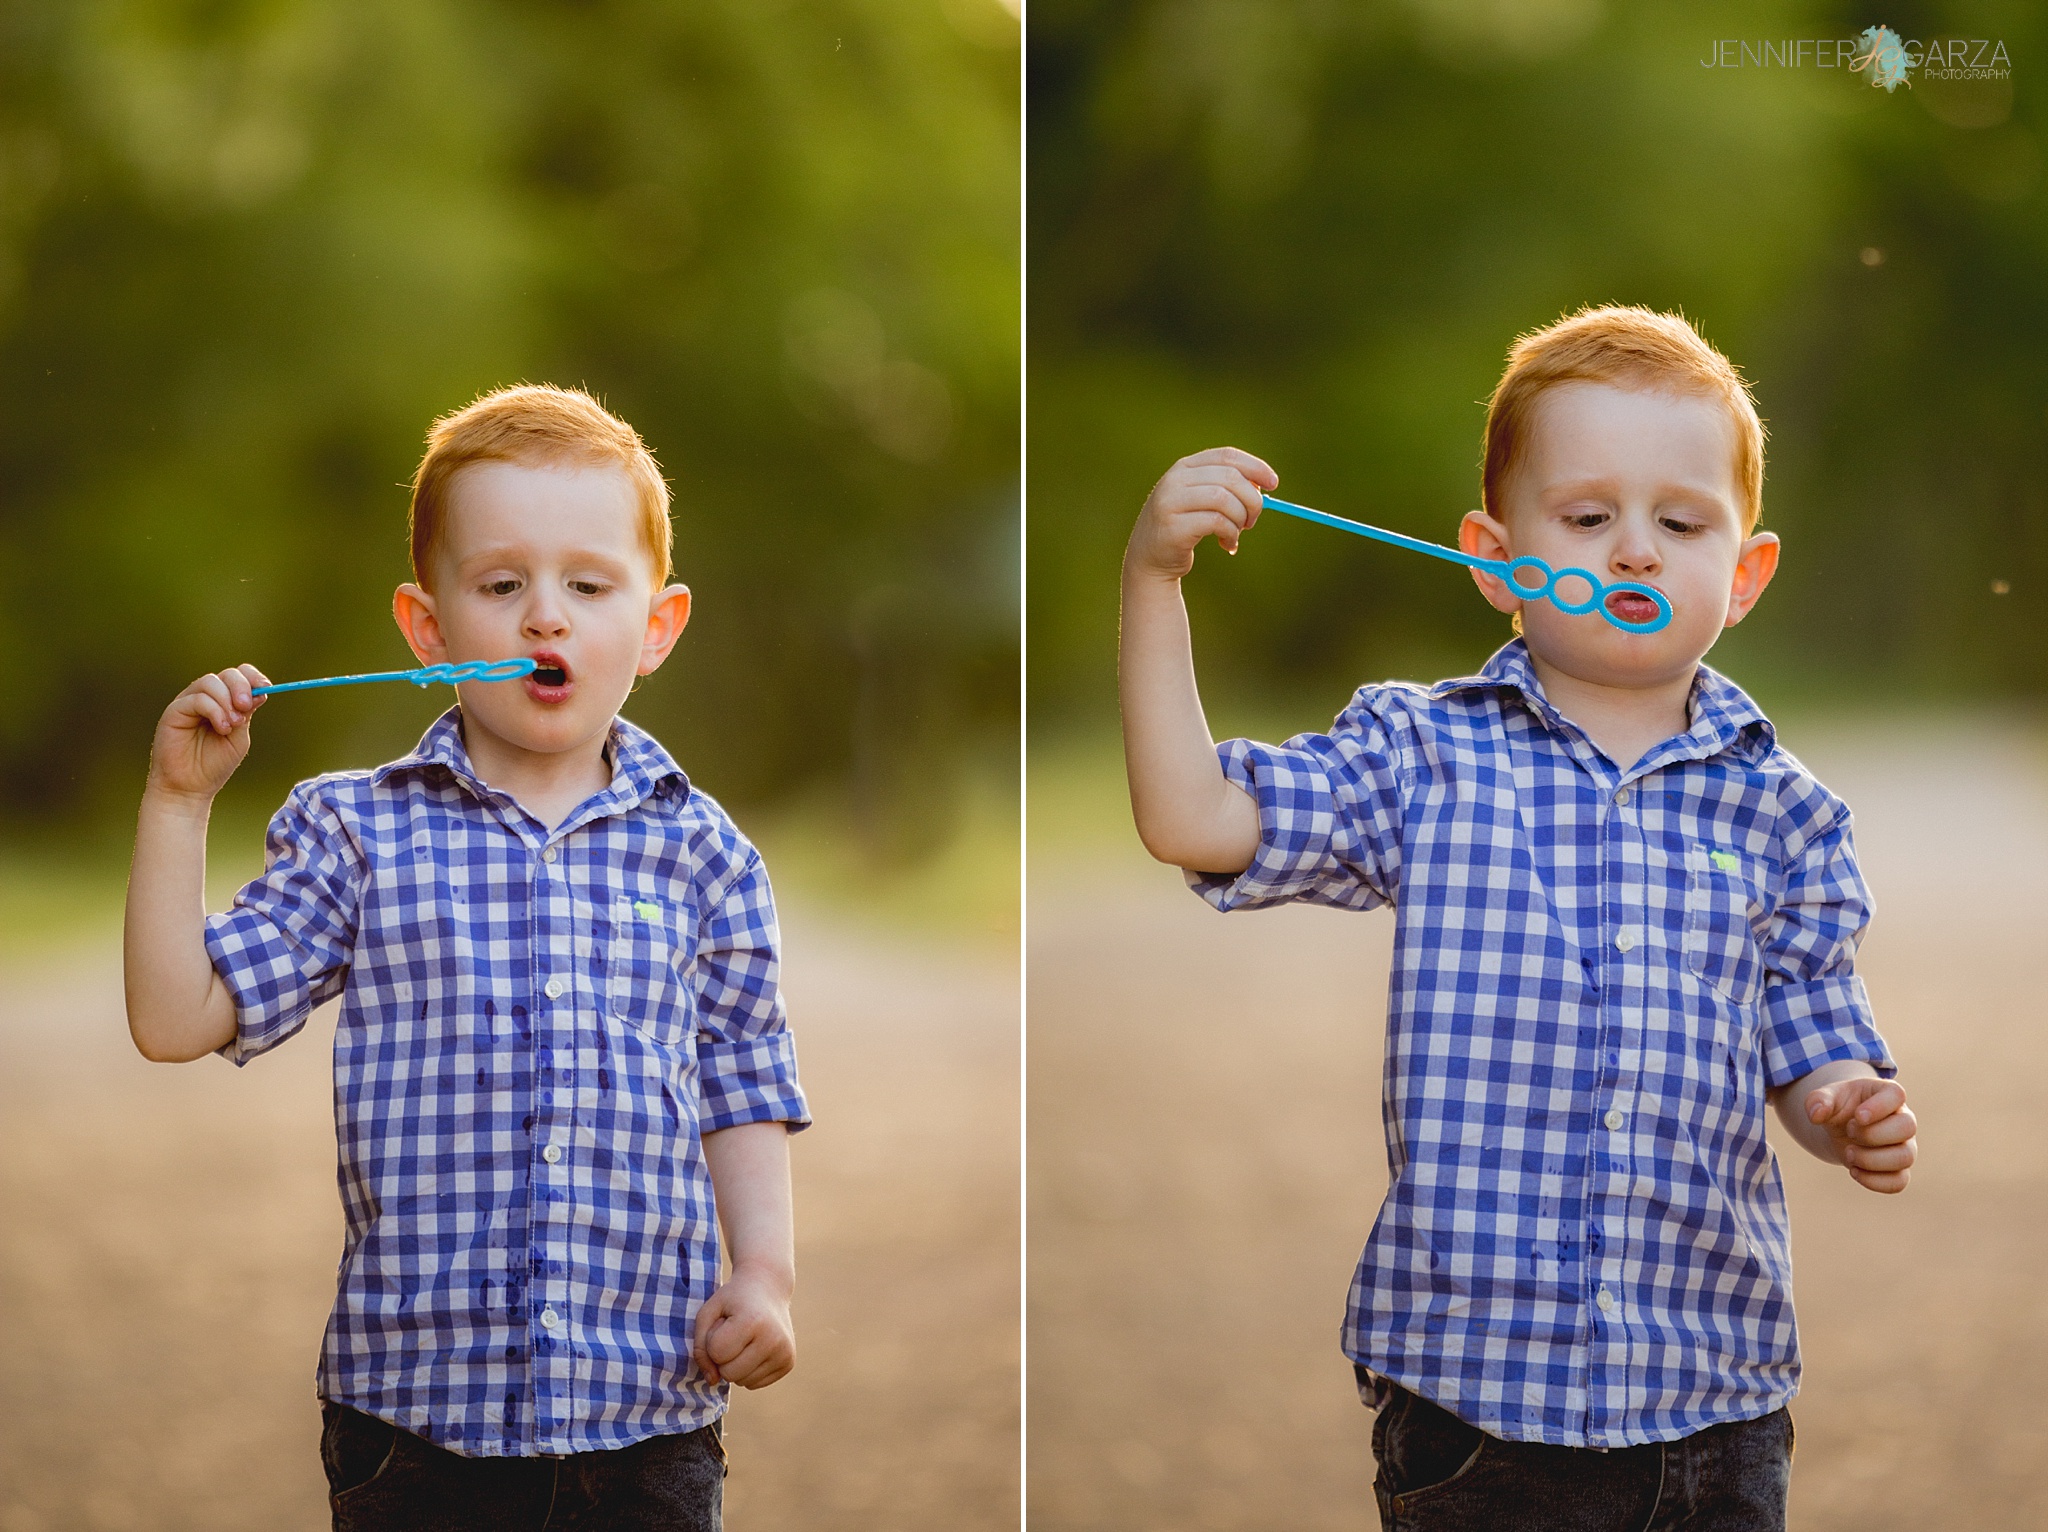 Playing with Bubbles during The Moffitt Family Photo Session at Golden Ponds Nature Area.